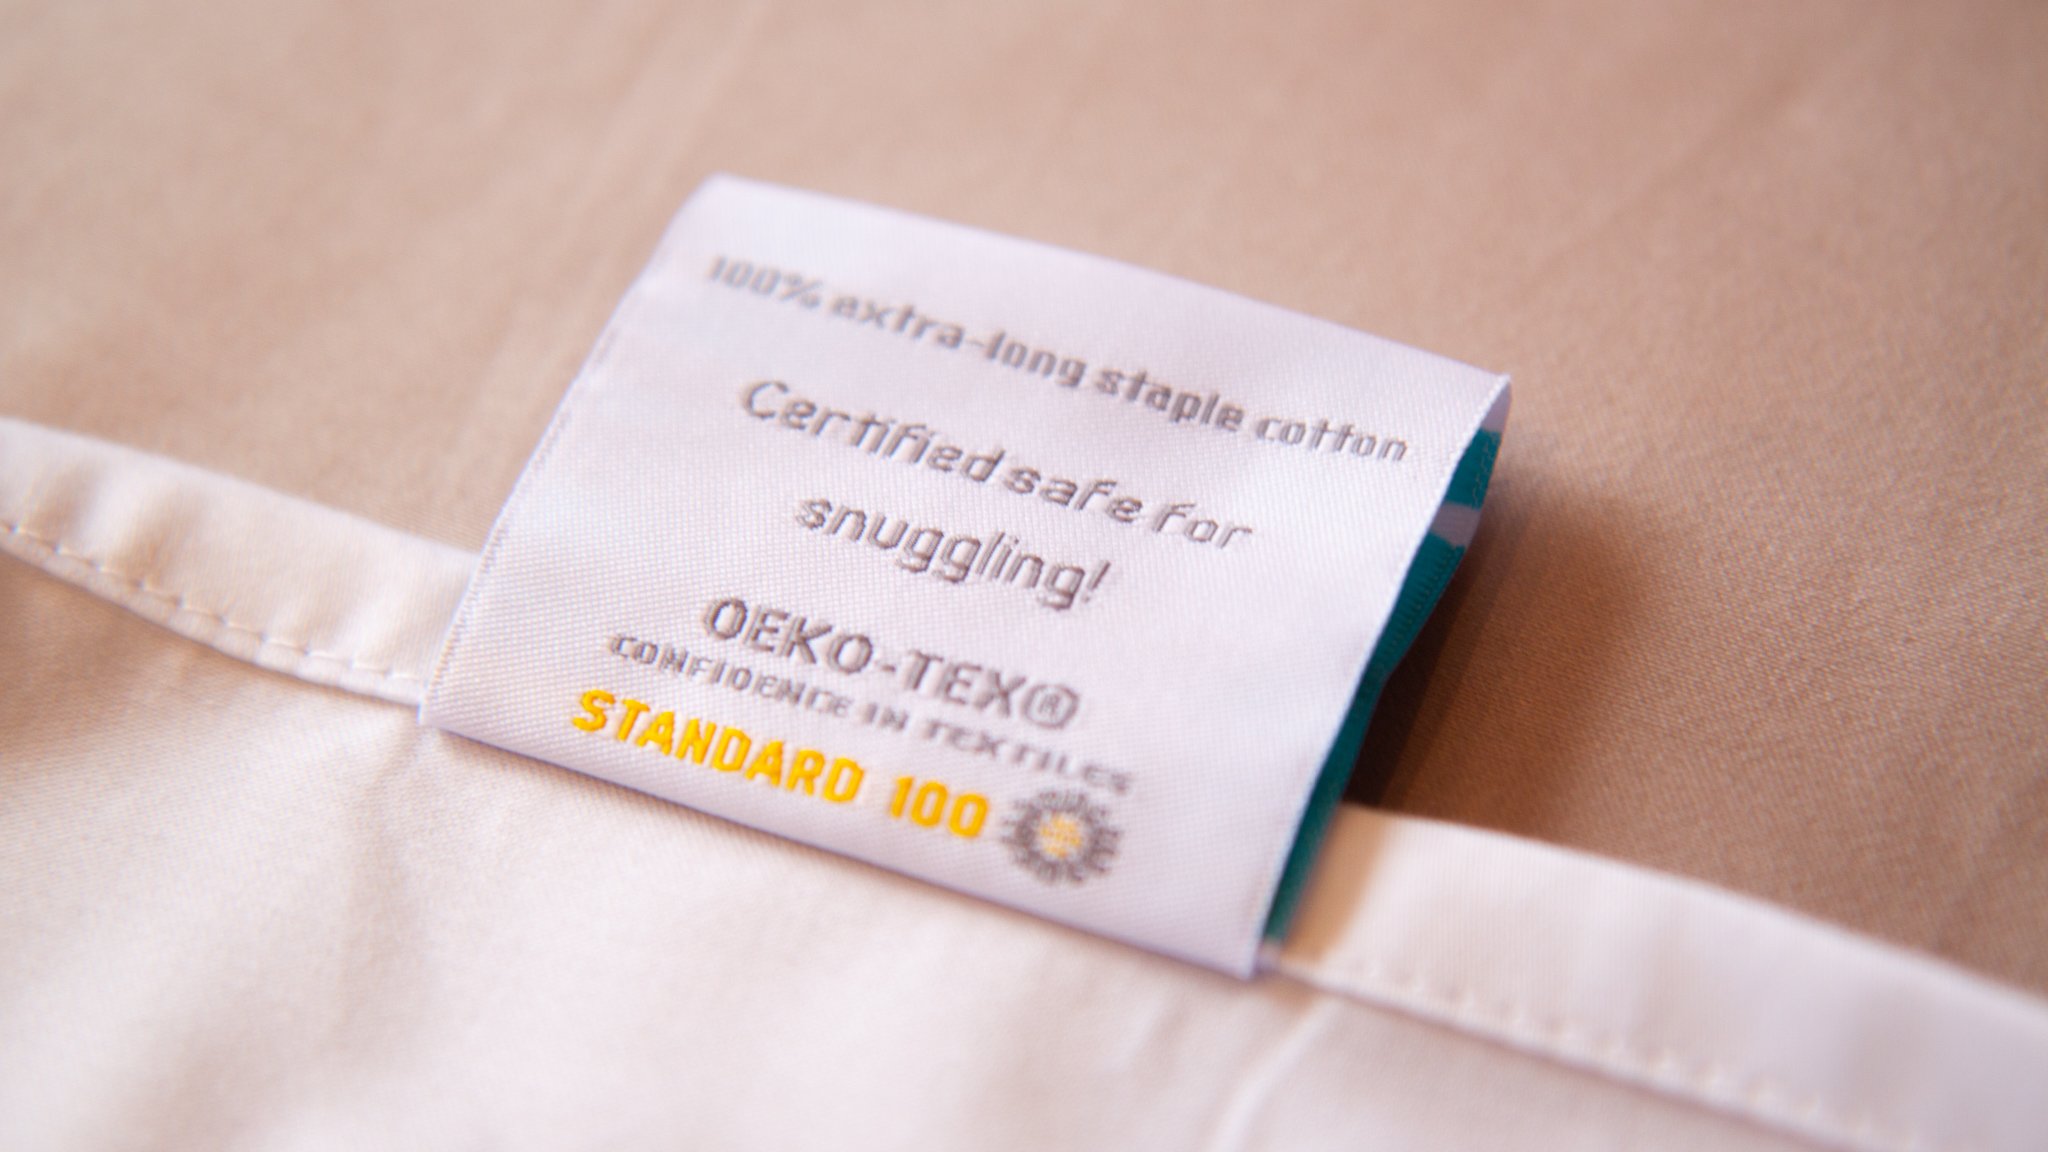 Embroidered tags to ensure longevity  